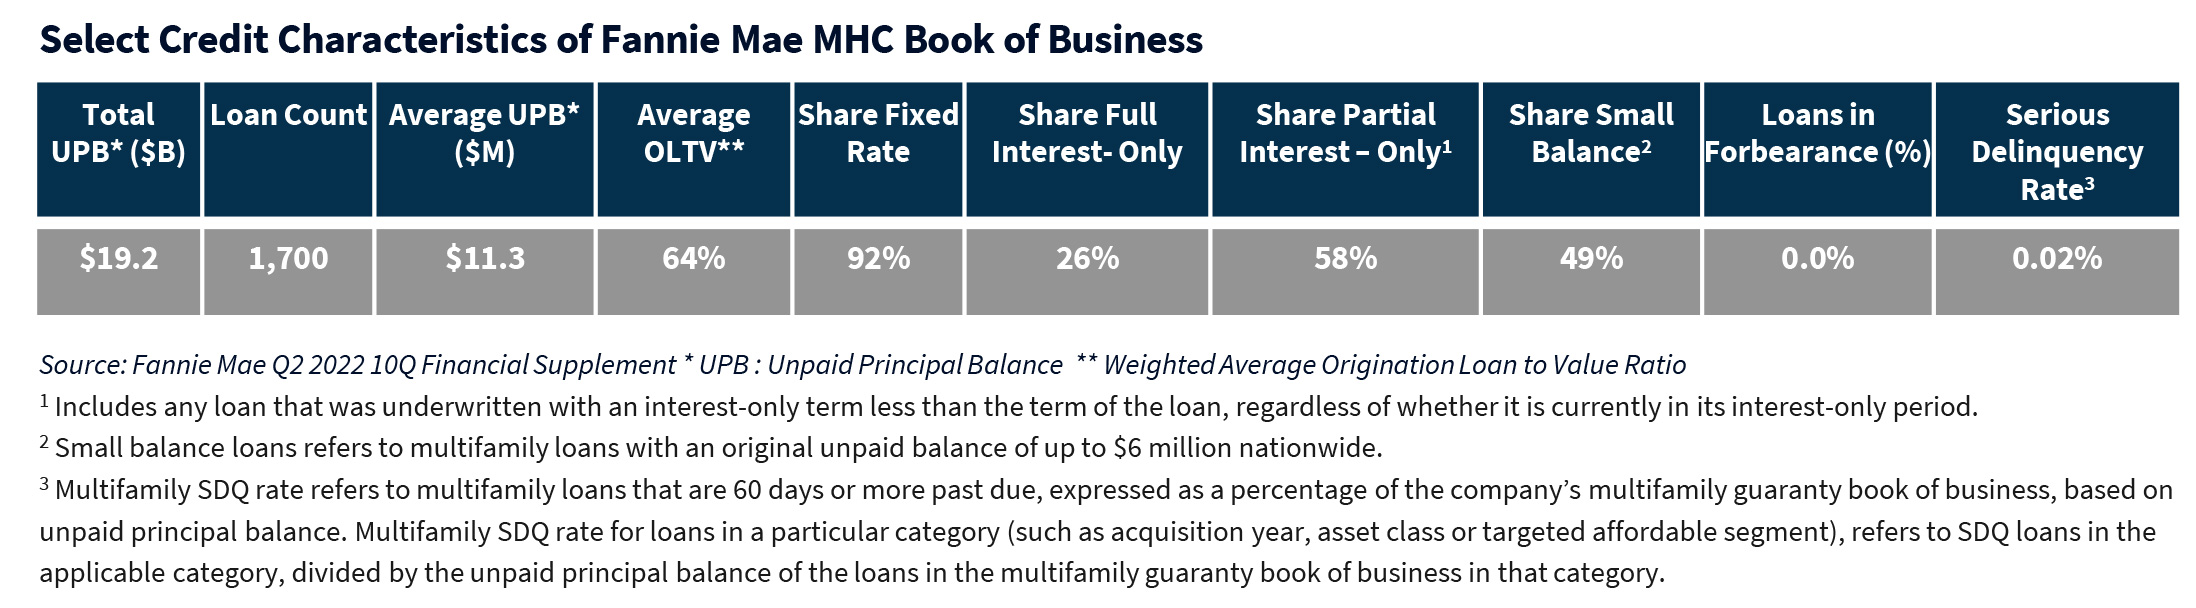 Select Credit Characteristics of Fannie Mae MHC Book of Business